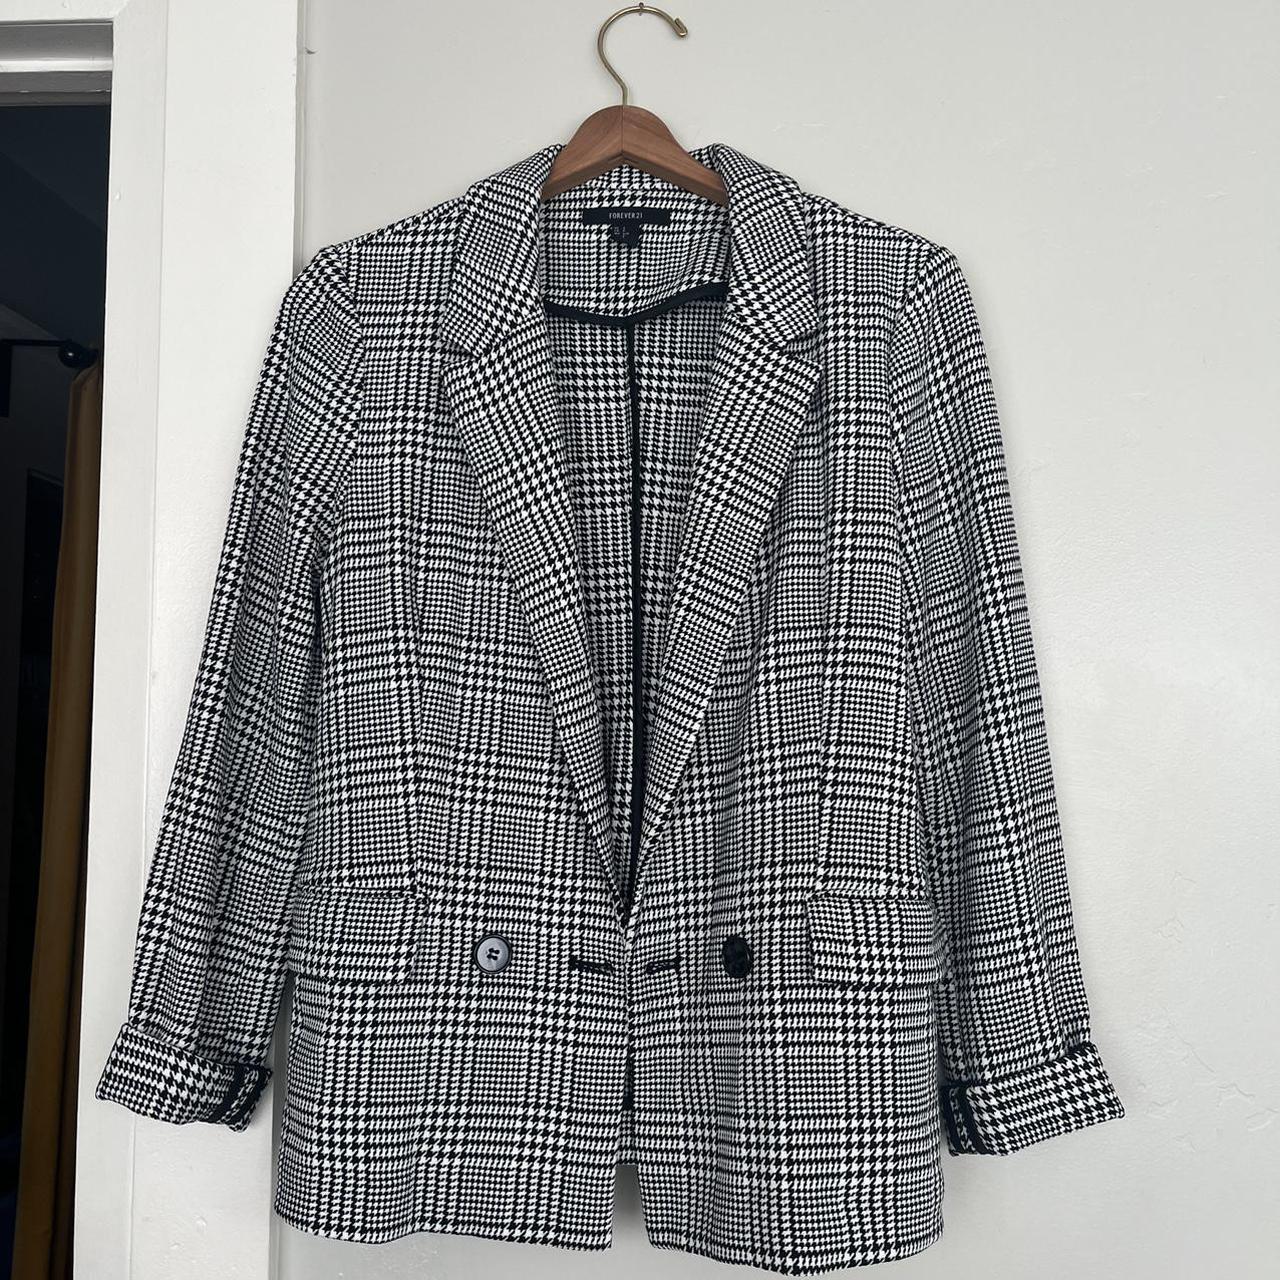 Product Image 2 - Black and white houndstooth blazer,